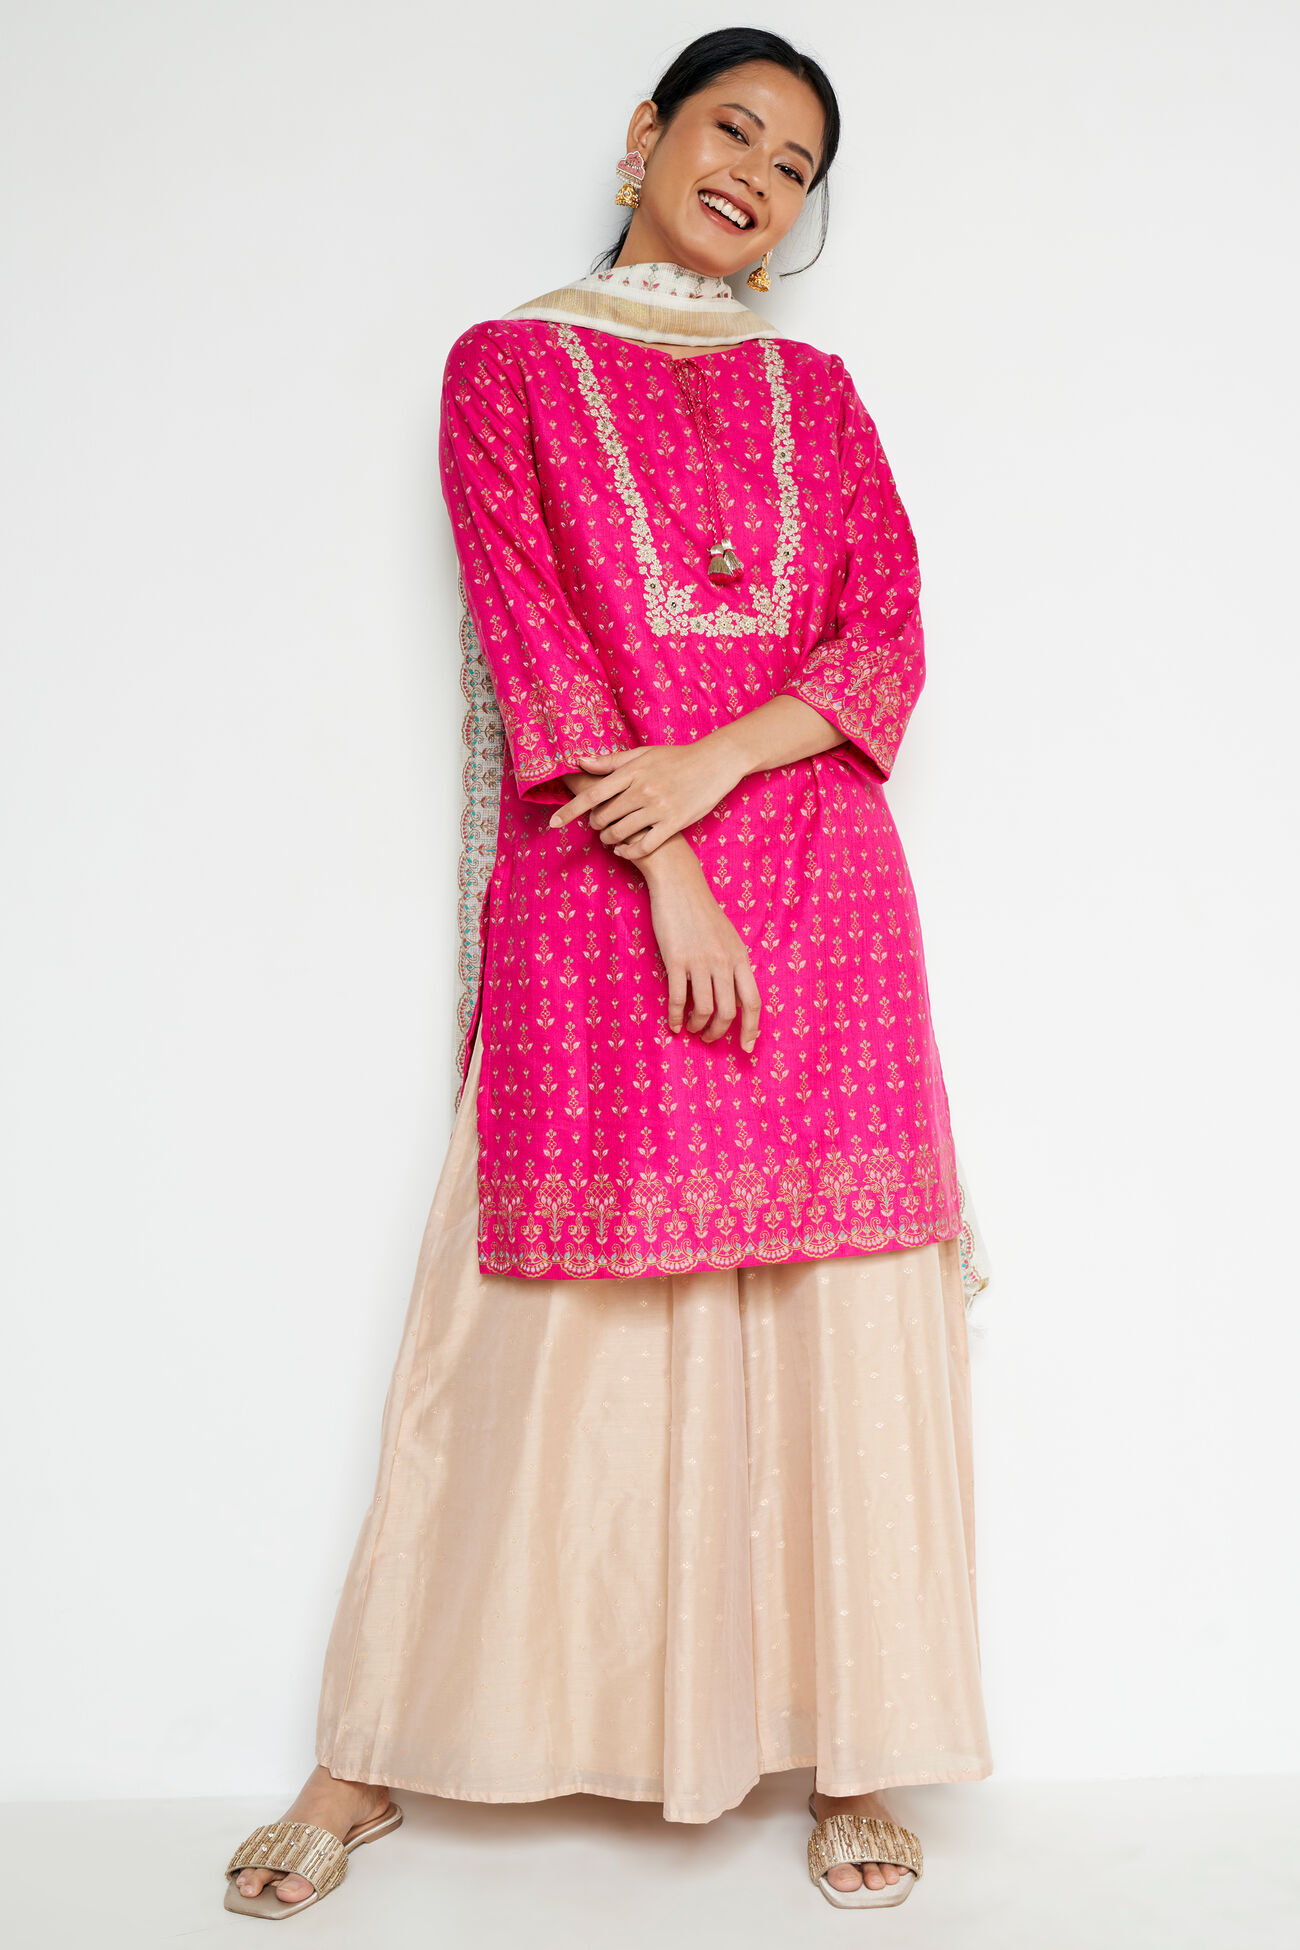 Hot Pink Ethnic Motifs Straight Suit, Hot Pink, image 1